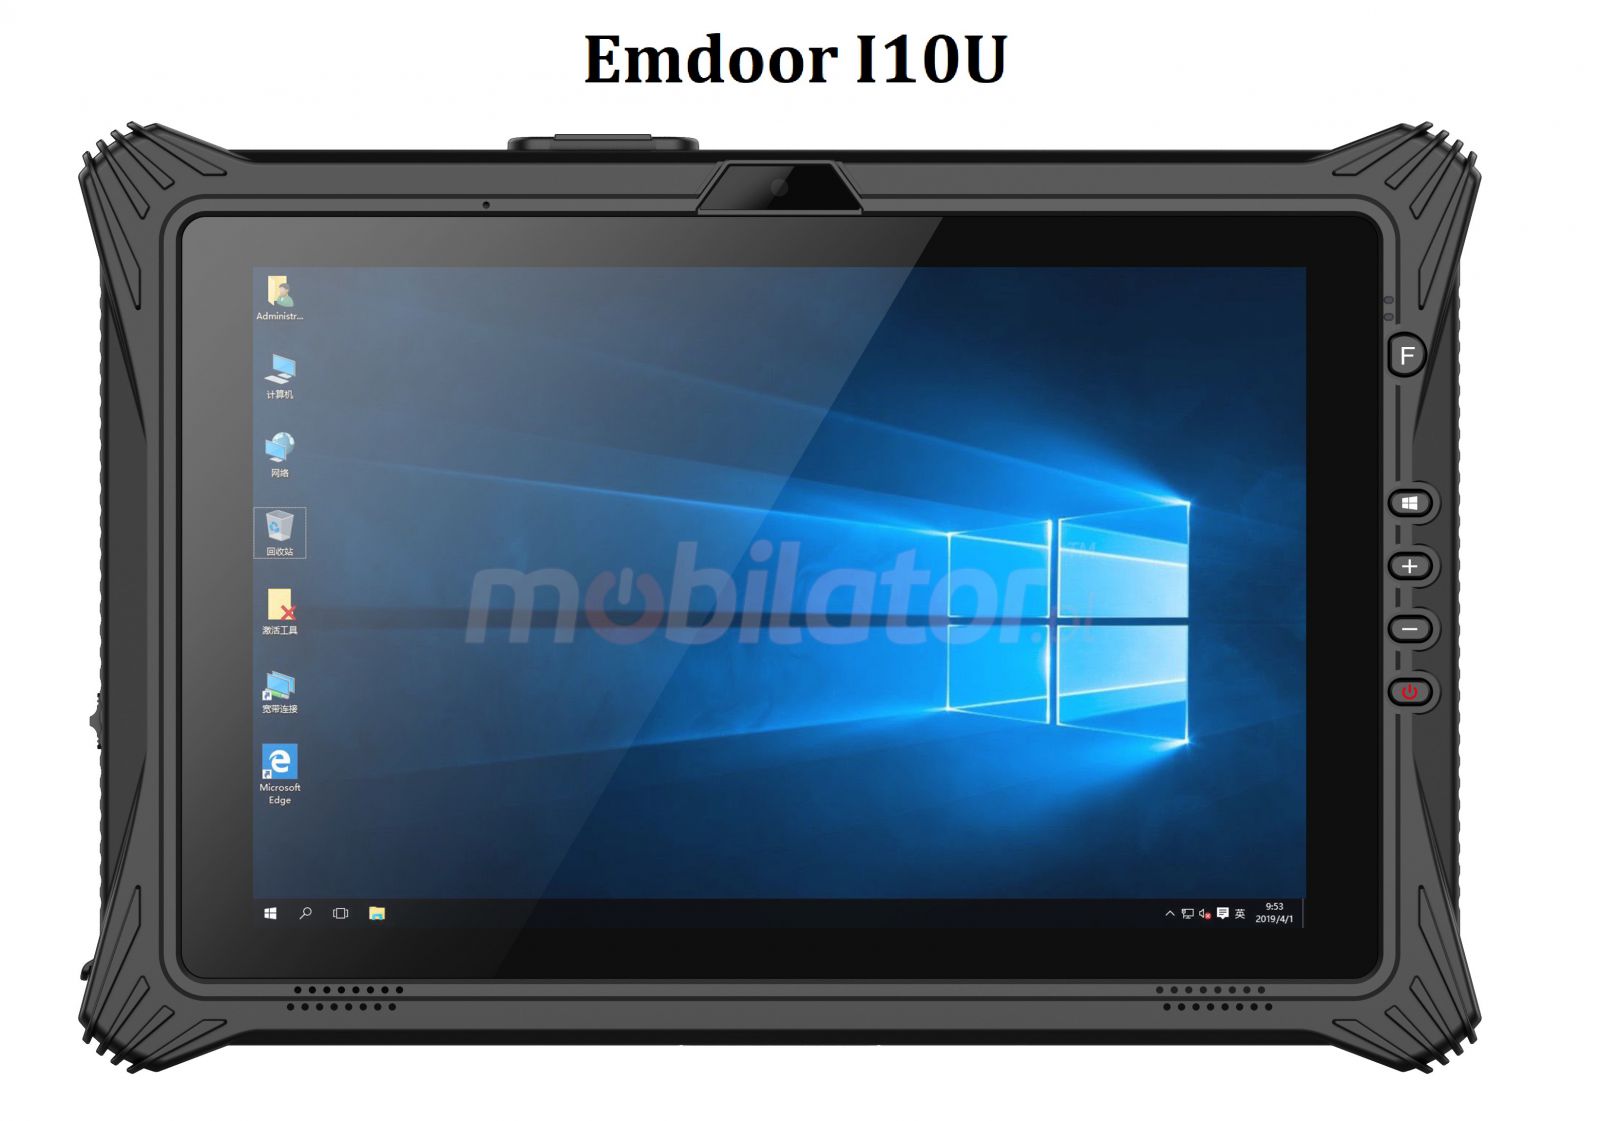 Emdoor I10U v.19 - Industrial 10-inch tablet with i7 processor, NFC, 1D MOTO barcode scanner, 16GB RAM and 512GB SSD, Windows 10 Home S, BT 4.2 